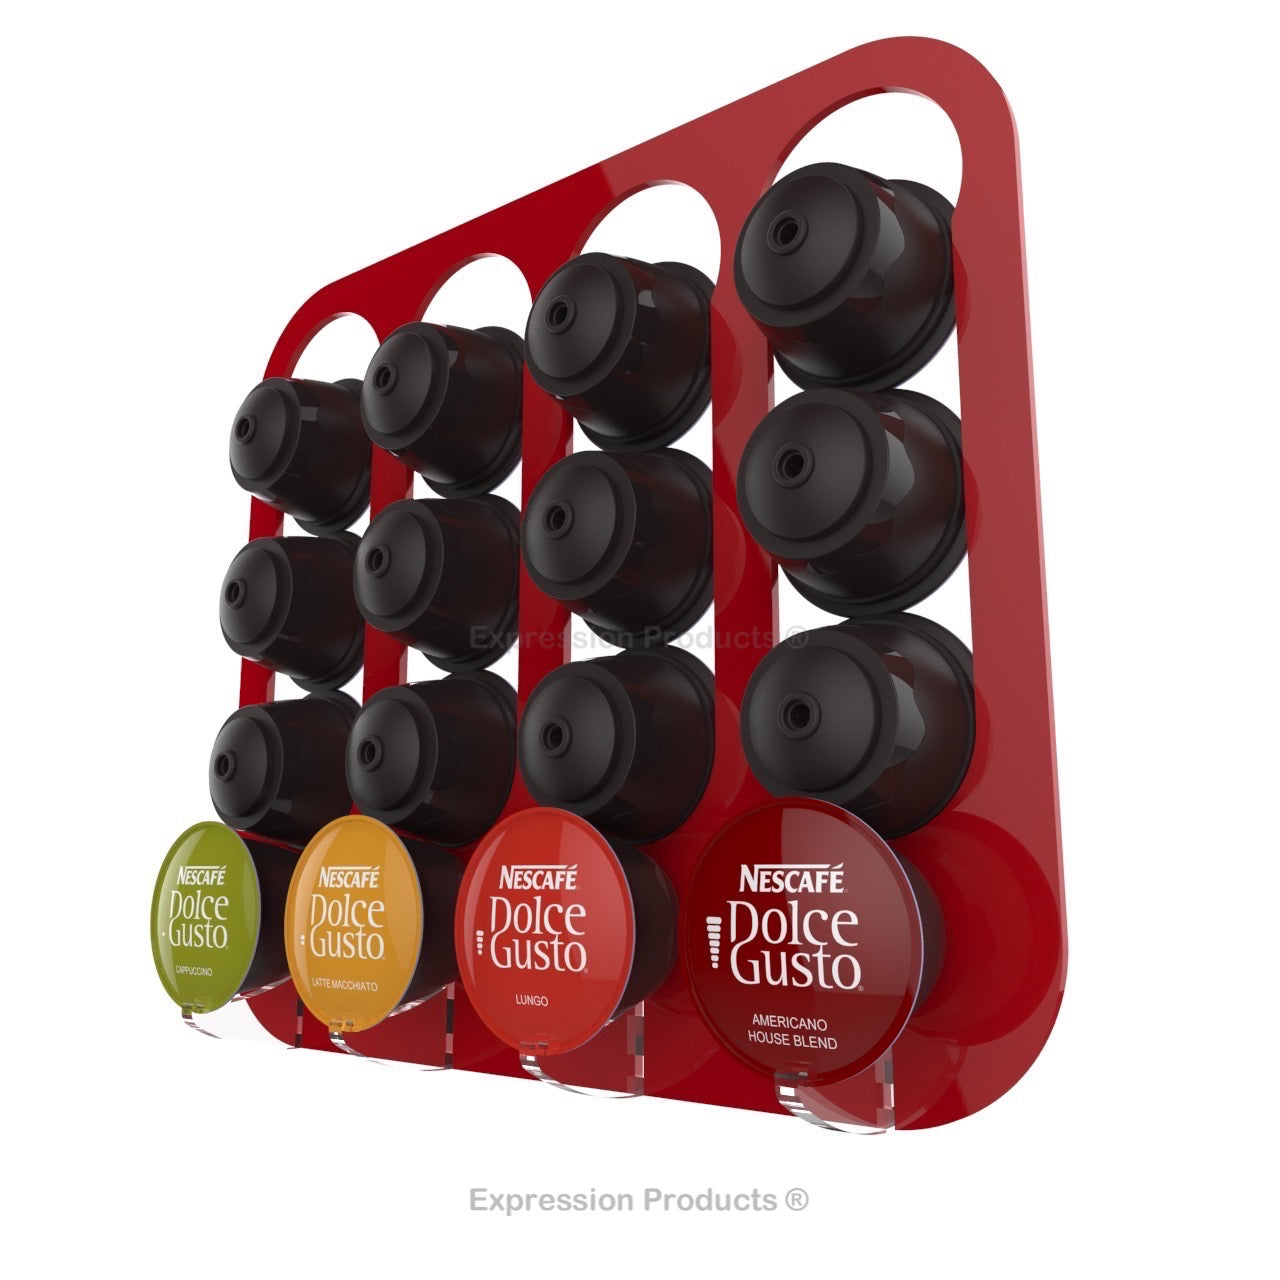 Dolce gusto coffee pod holder, wall mounted, half height.  Shown in red holding 16 pods